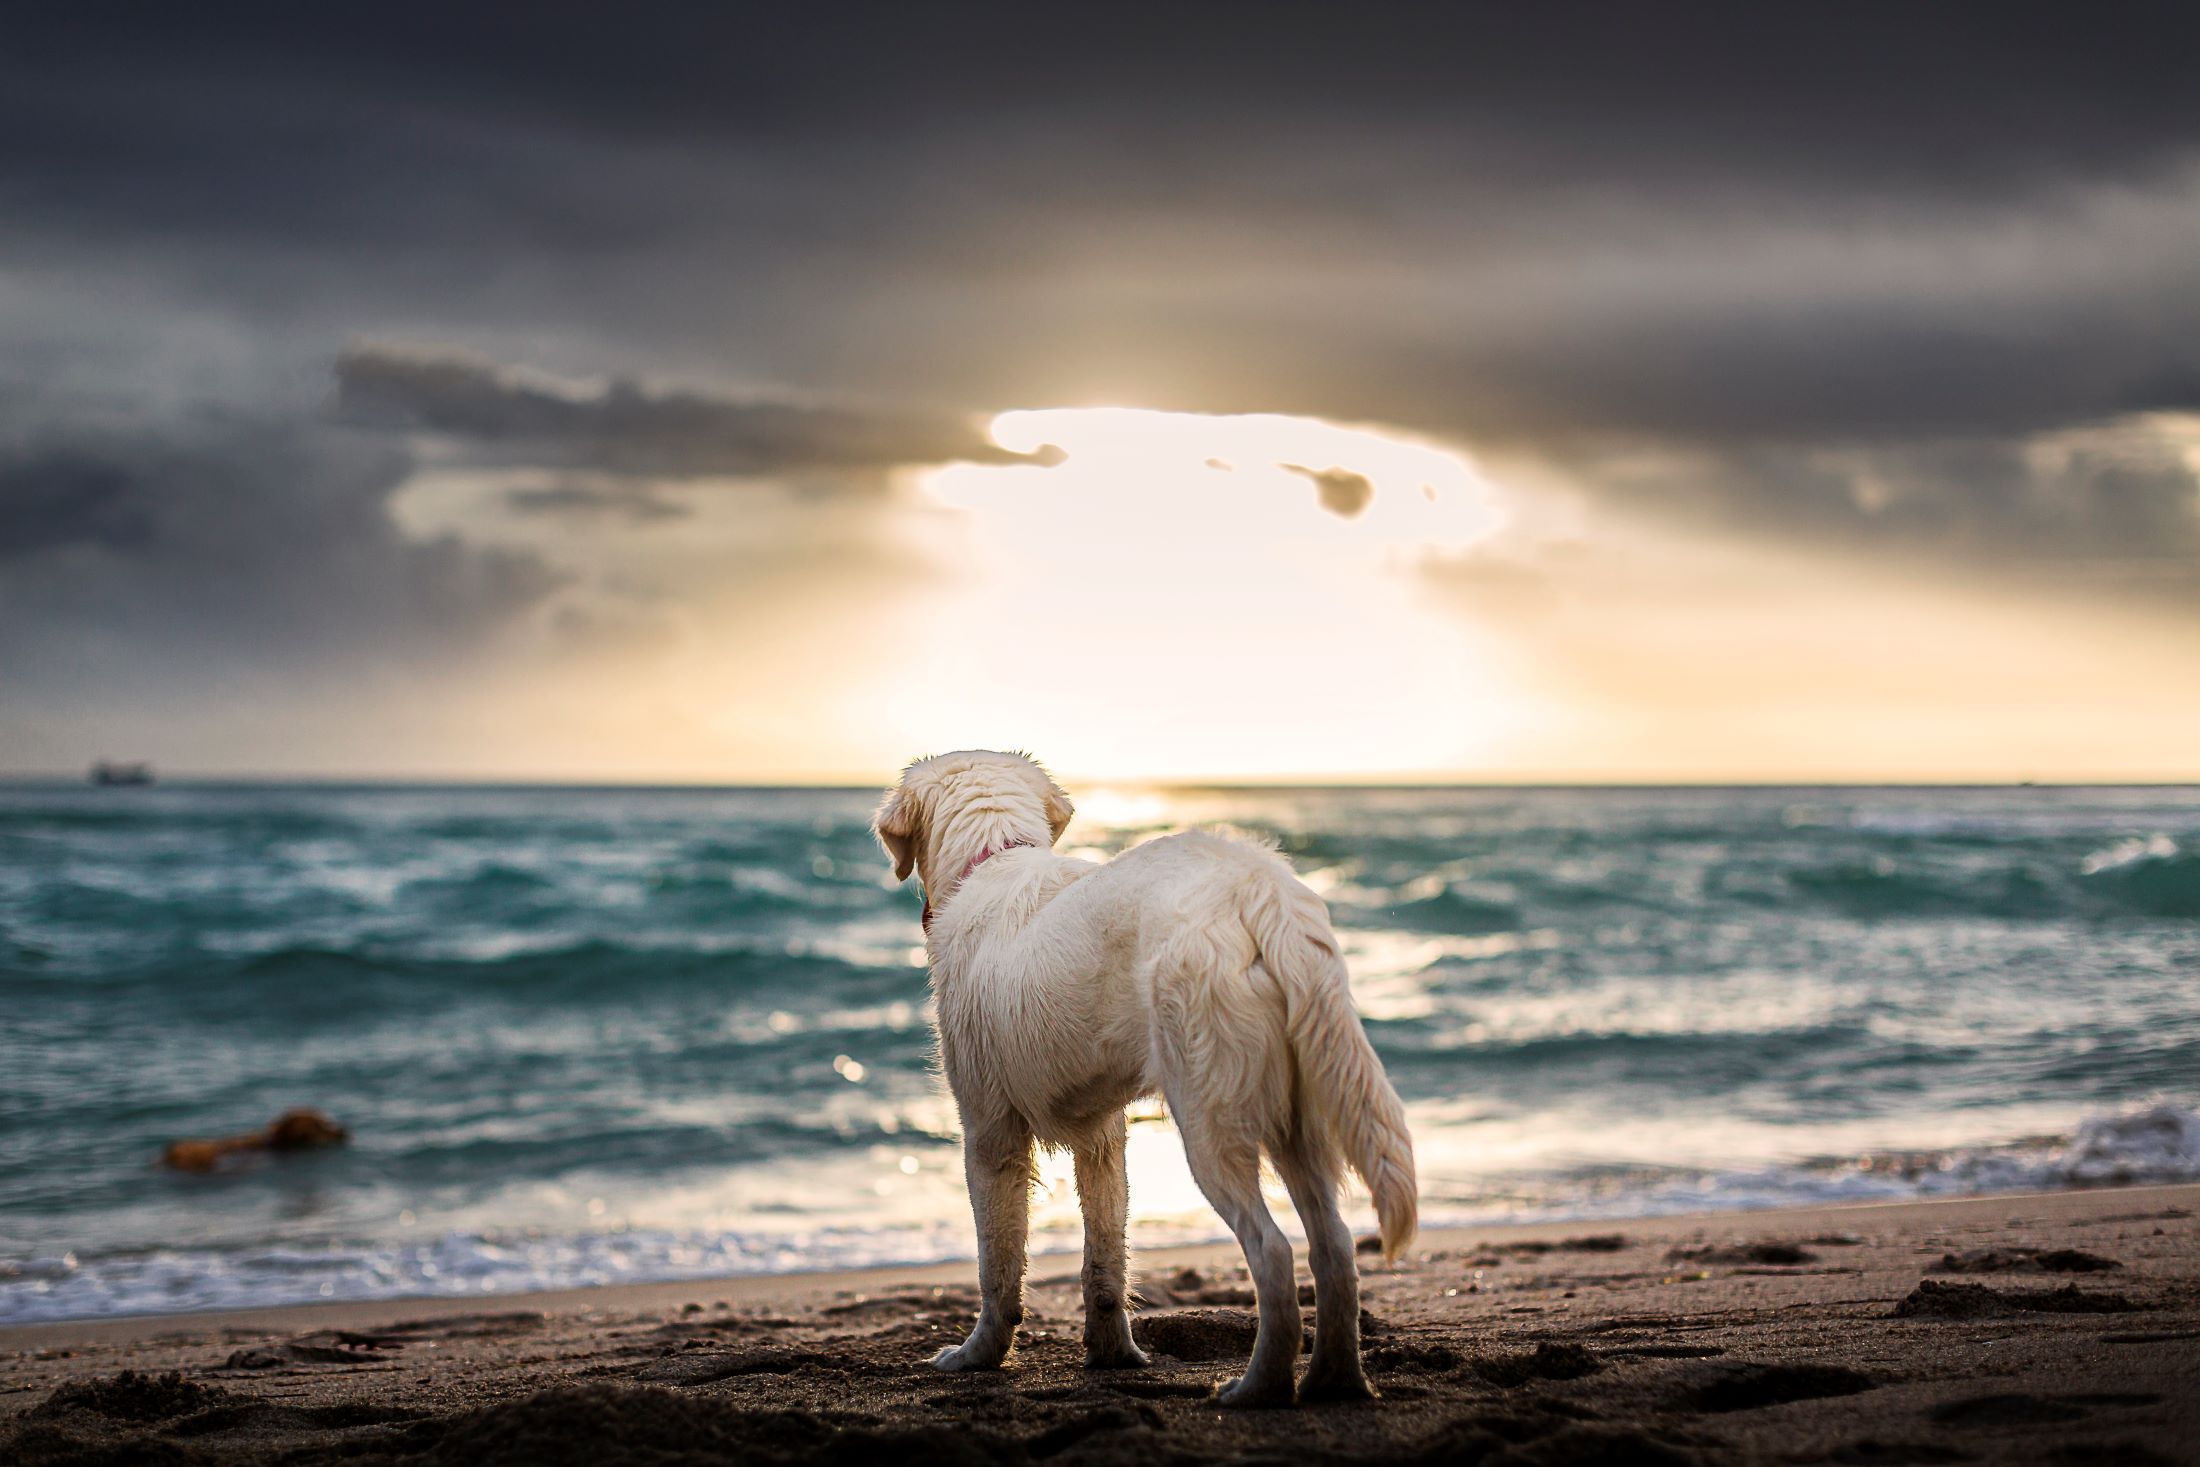 dog on beach looking out at the ocean at sunset